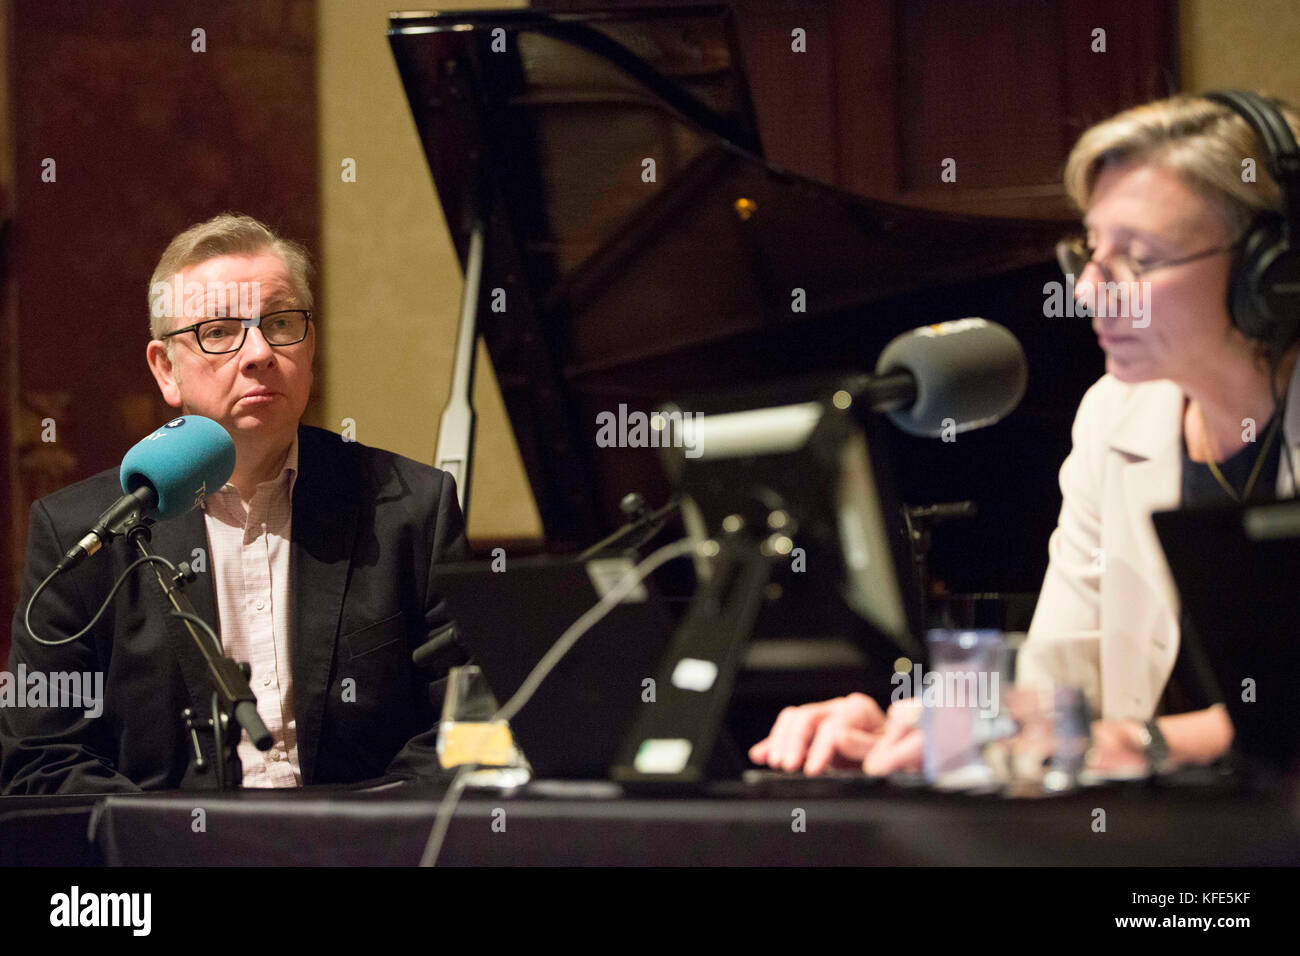 Environment Secretary Michael Gove (left) speaking to BBC Radio 4 presenter Sarah Montague and John Humphrys (not pictured) at Wigmore Hall in central London, as the BBC Radio 4 programme celebrates its 60th anniversary, where he made an on air joke about disgraced movie mogul Harvey Weinstein. Stock Photo